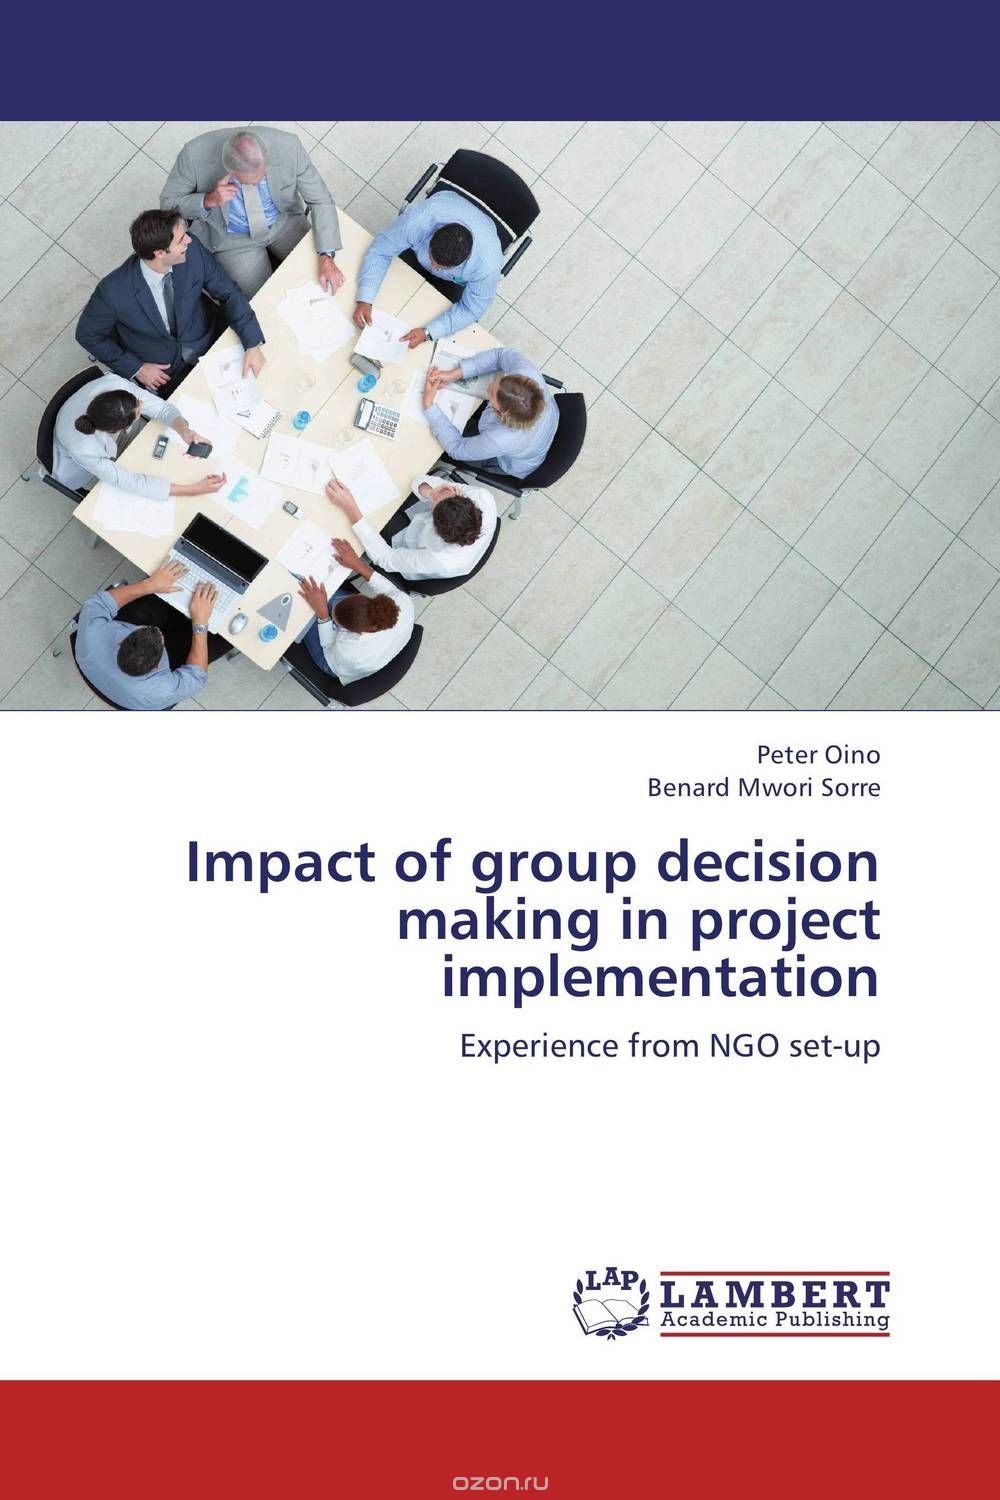 Impact of group decision making in project implementation